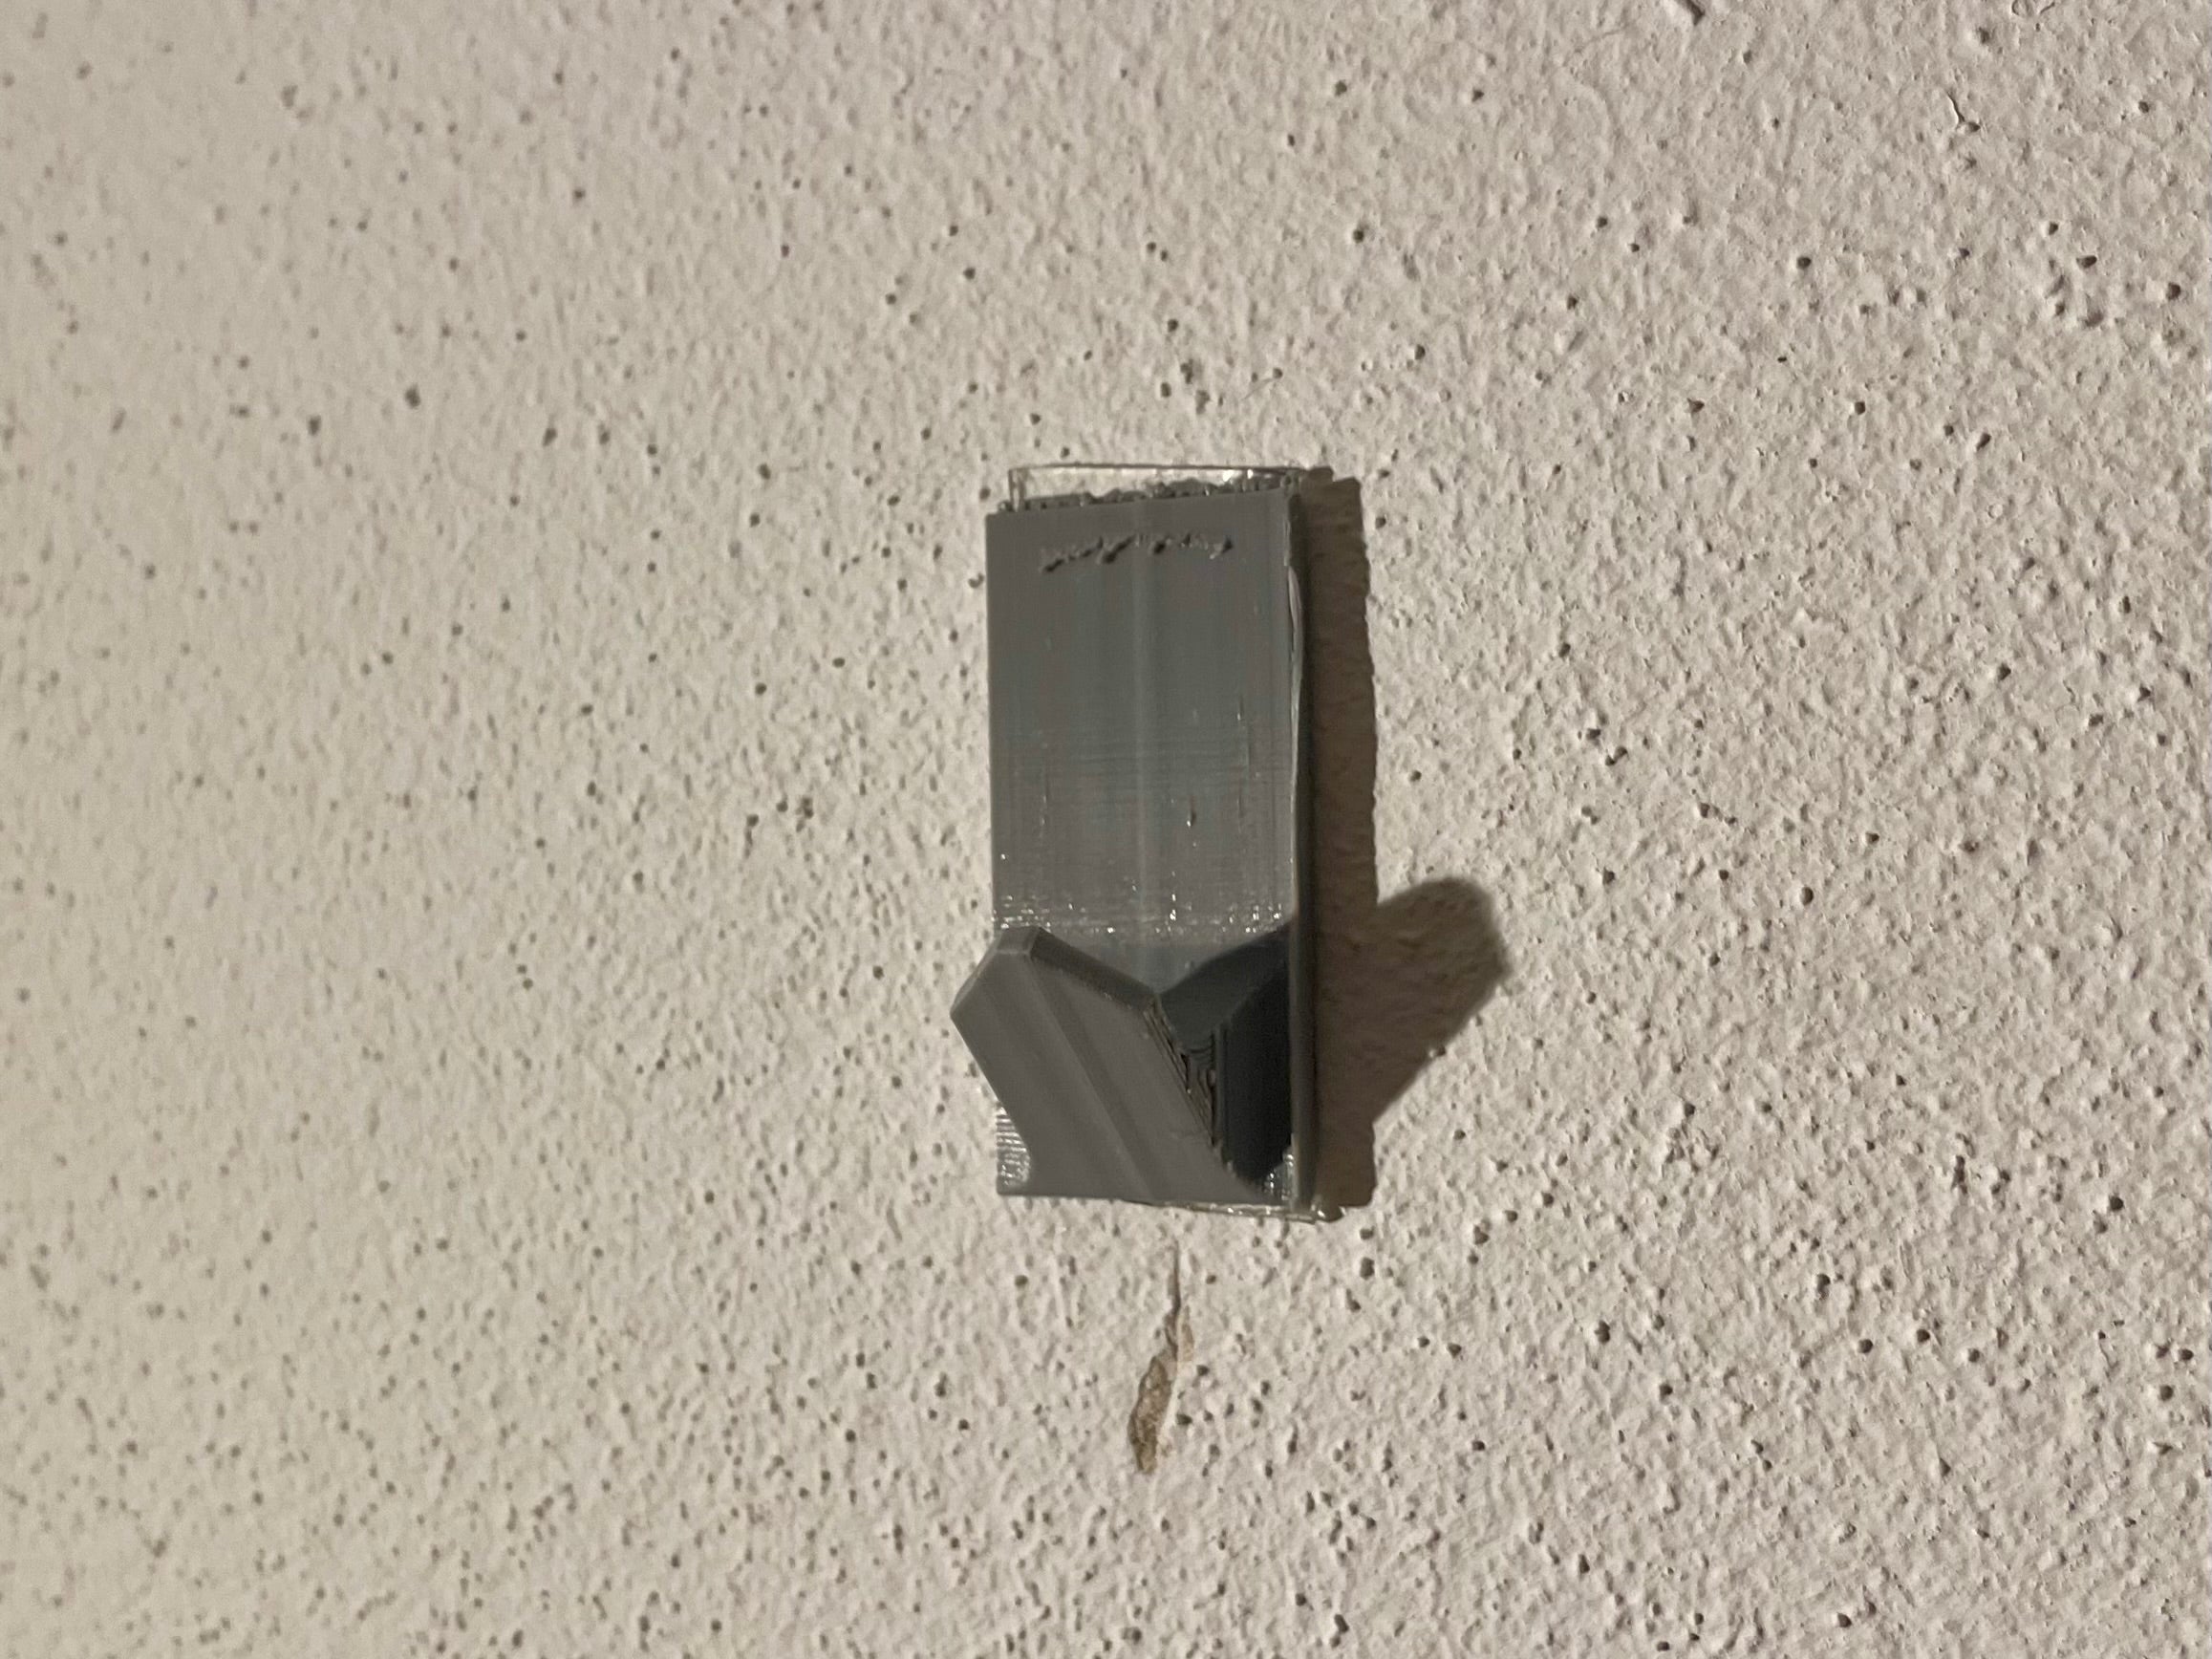 3D Printed Wall Hook for Photos and Decor